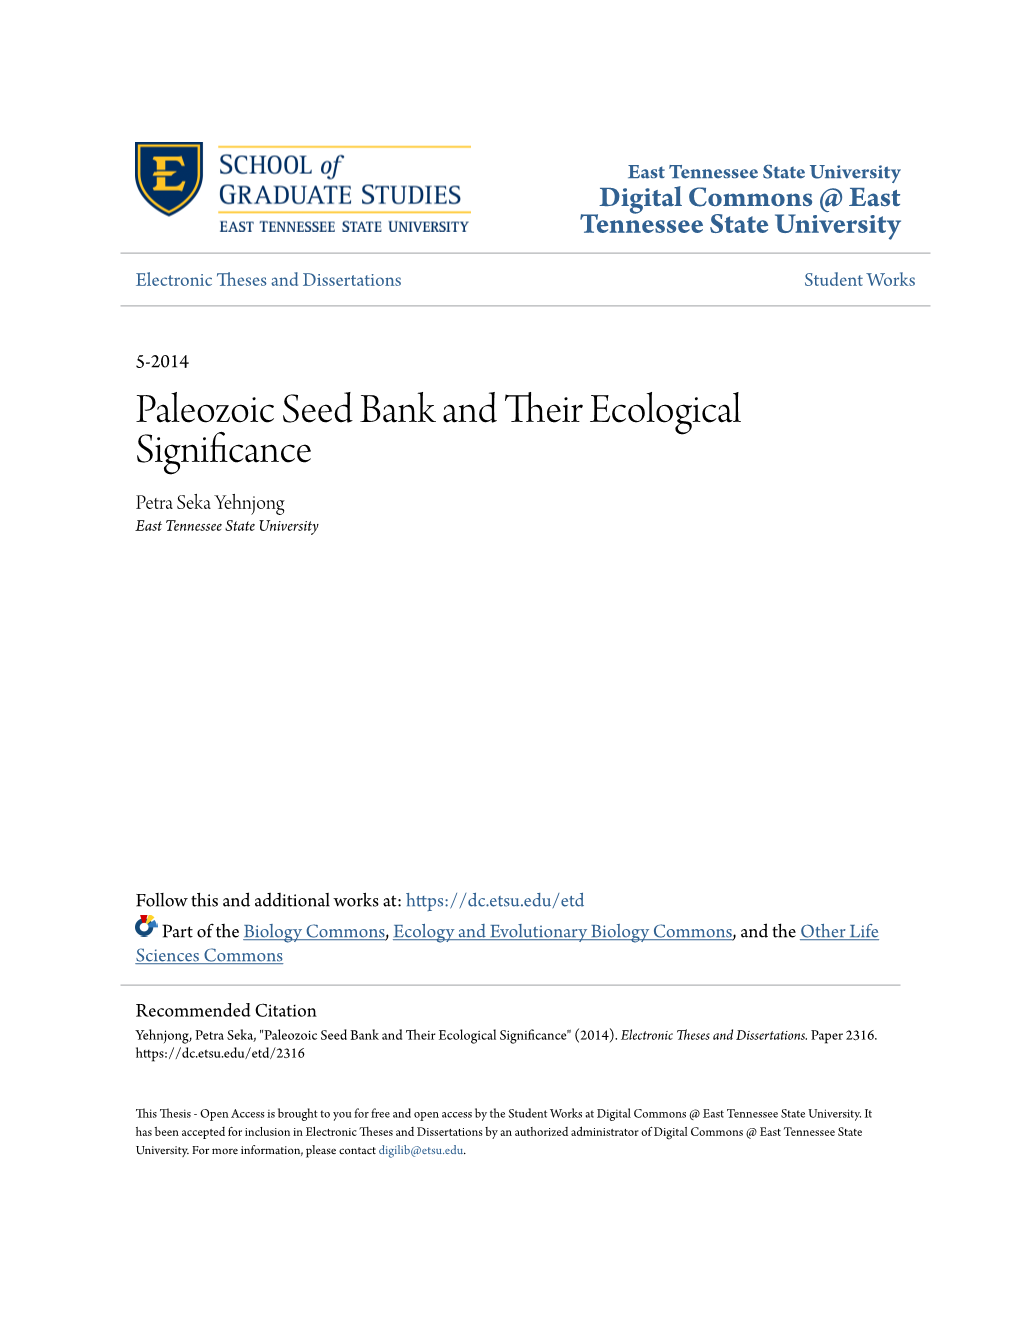 Paleozoic Seed Bank and Their Ecological Significance